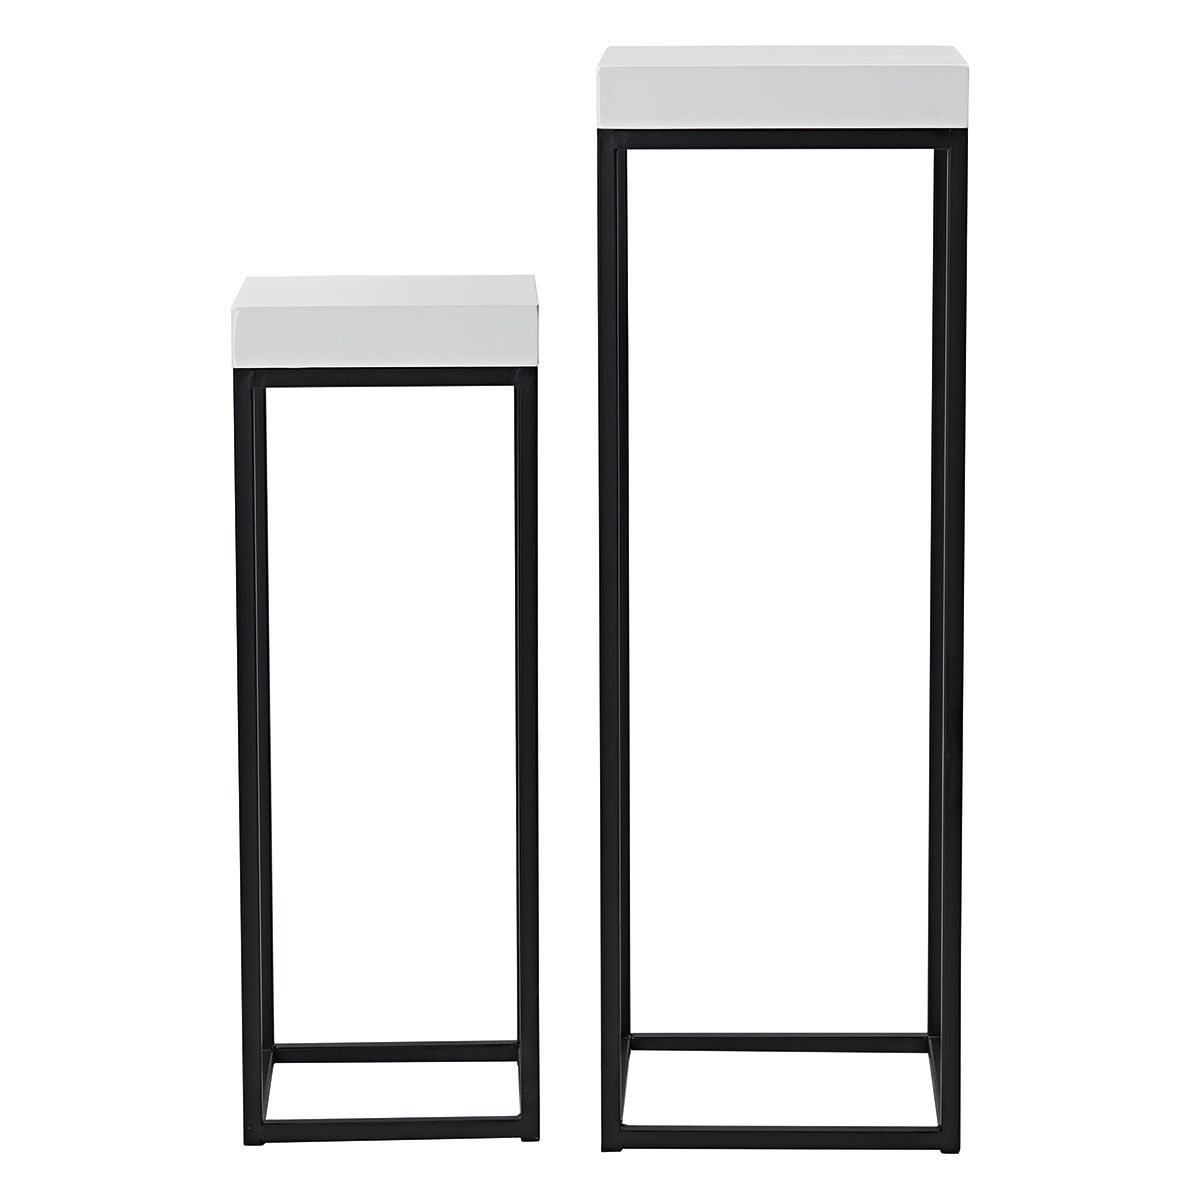 Fabio Nest 2X Plant Stand White Gloss Regarding White Plant Stands (View 15 of 15)